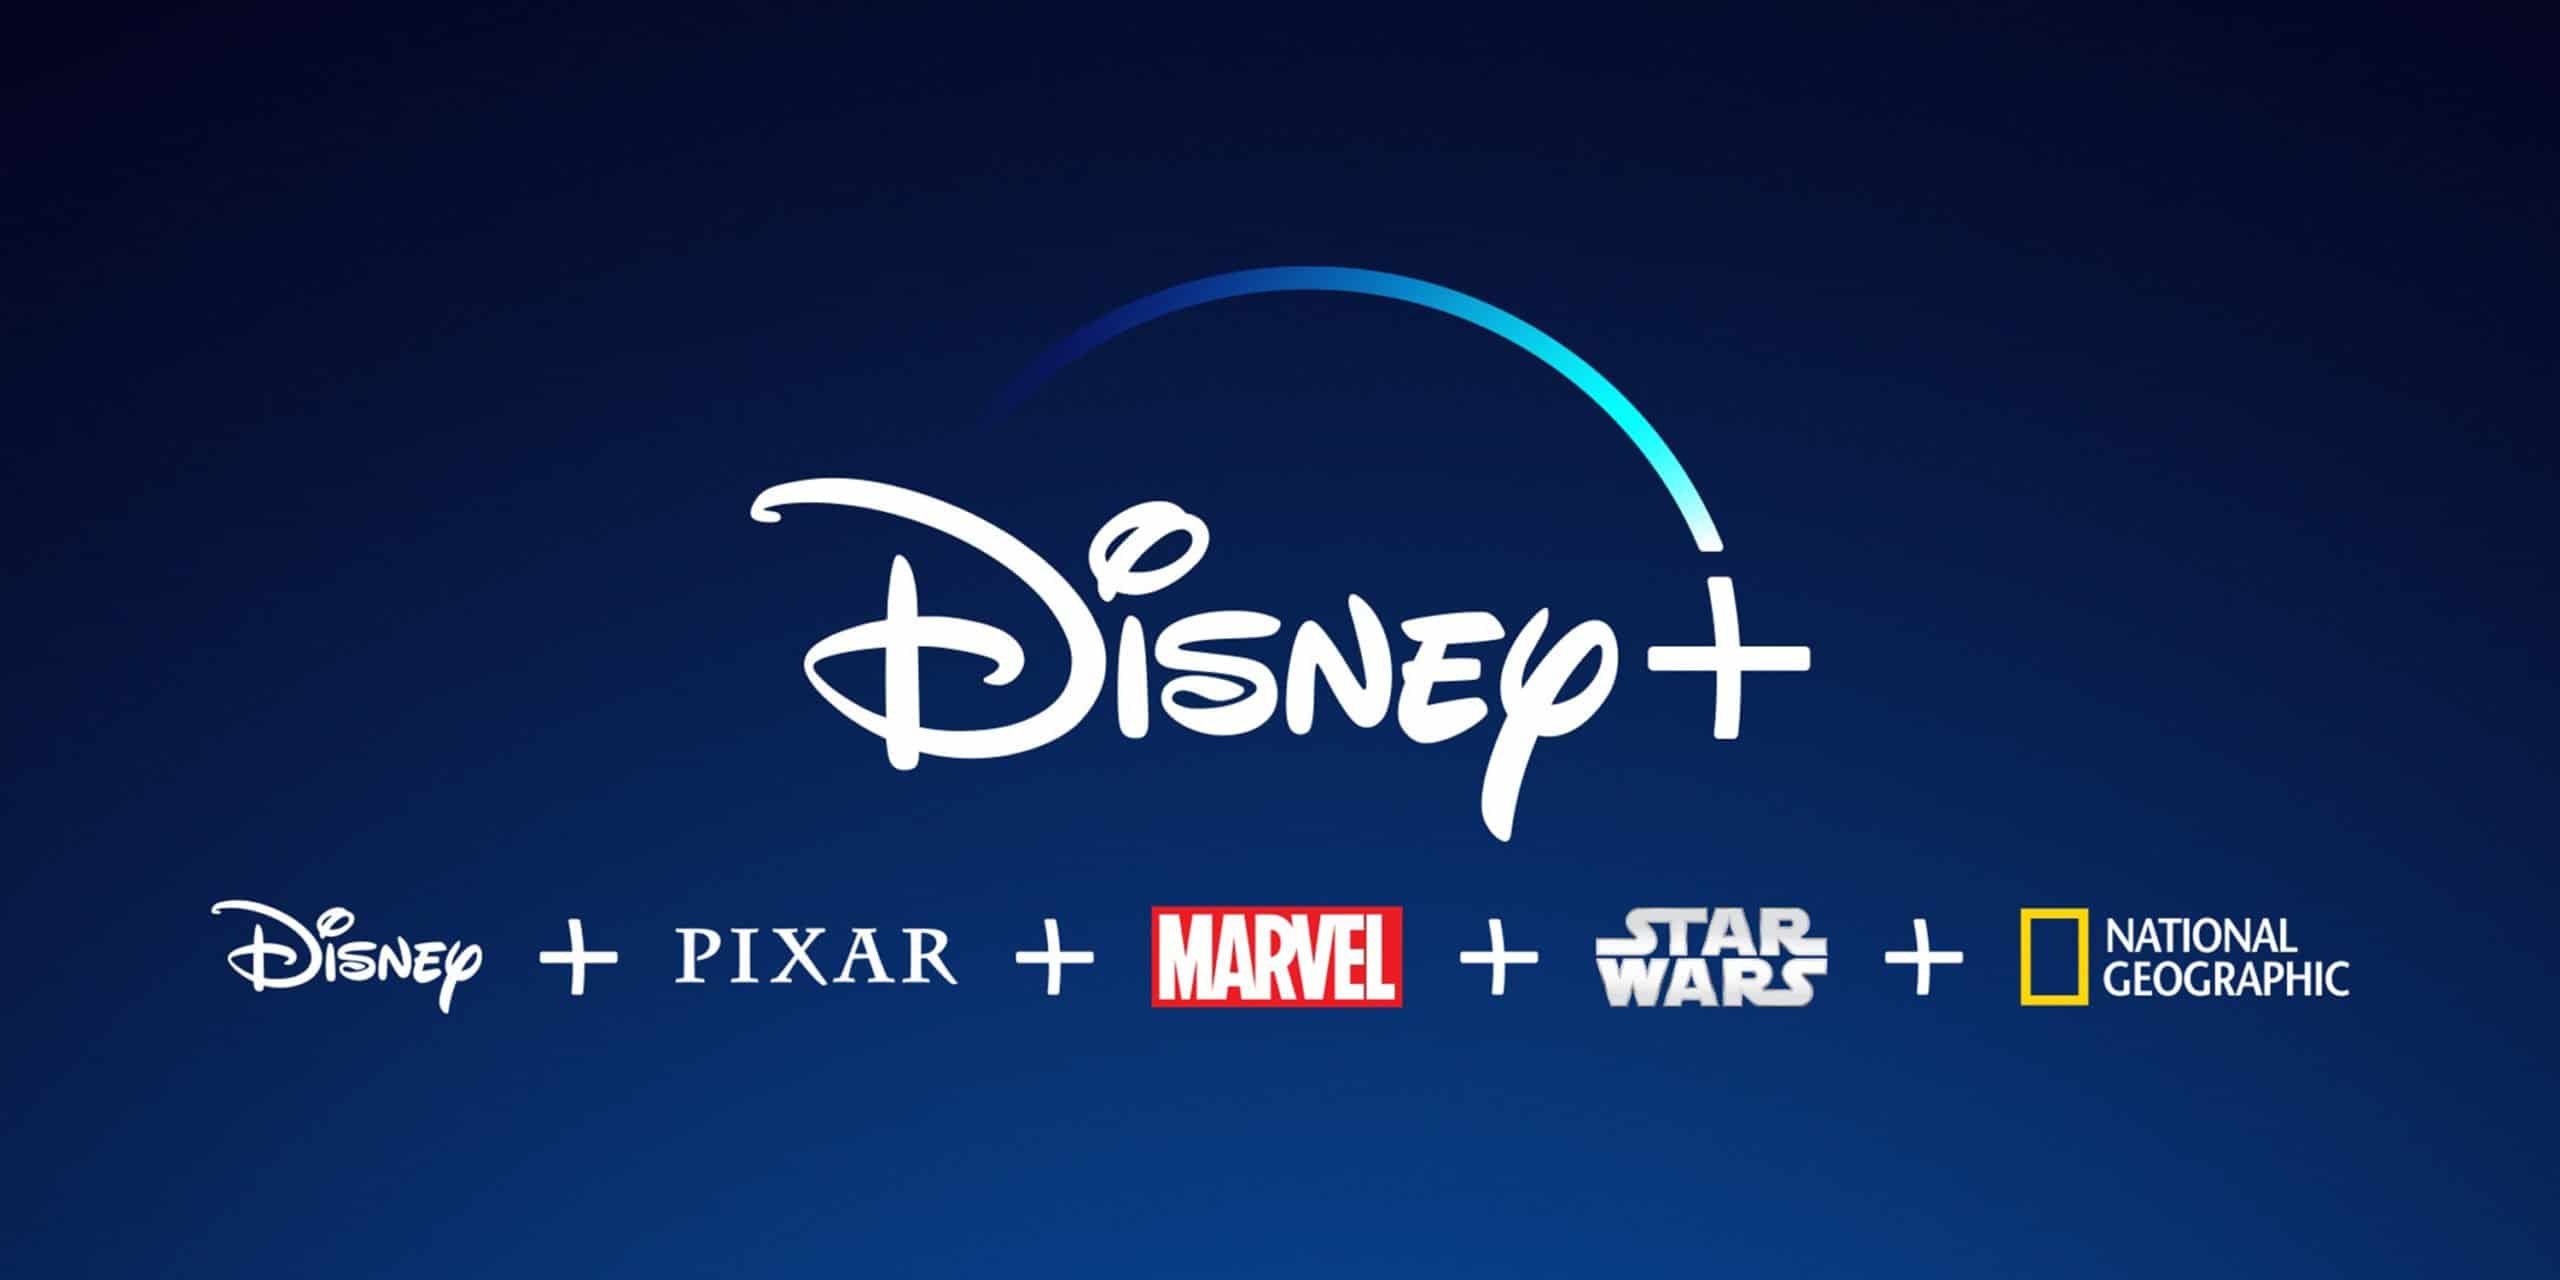 Disney+ Adsupported subscription shows 4 minutes of commercials per hour